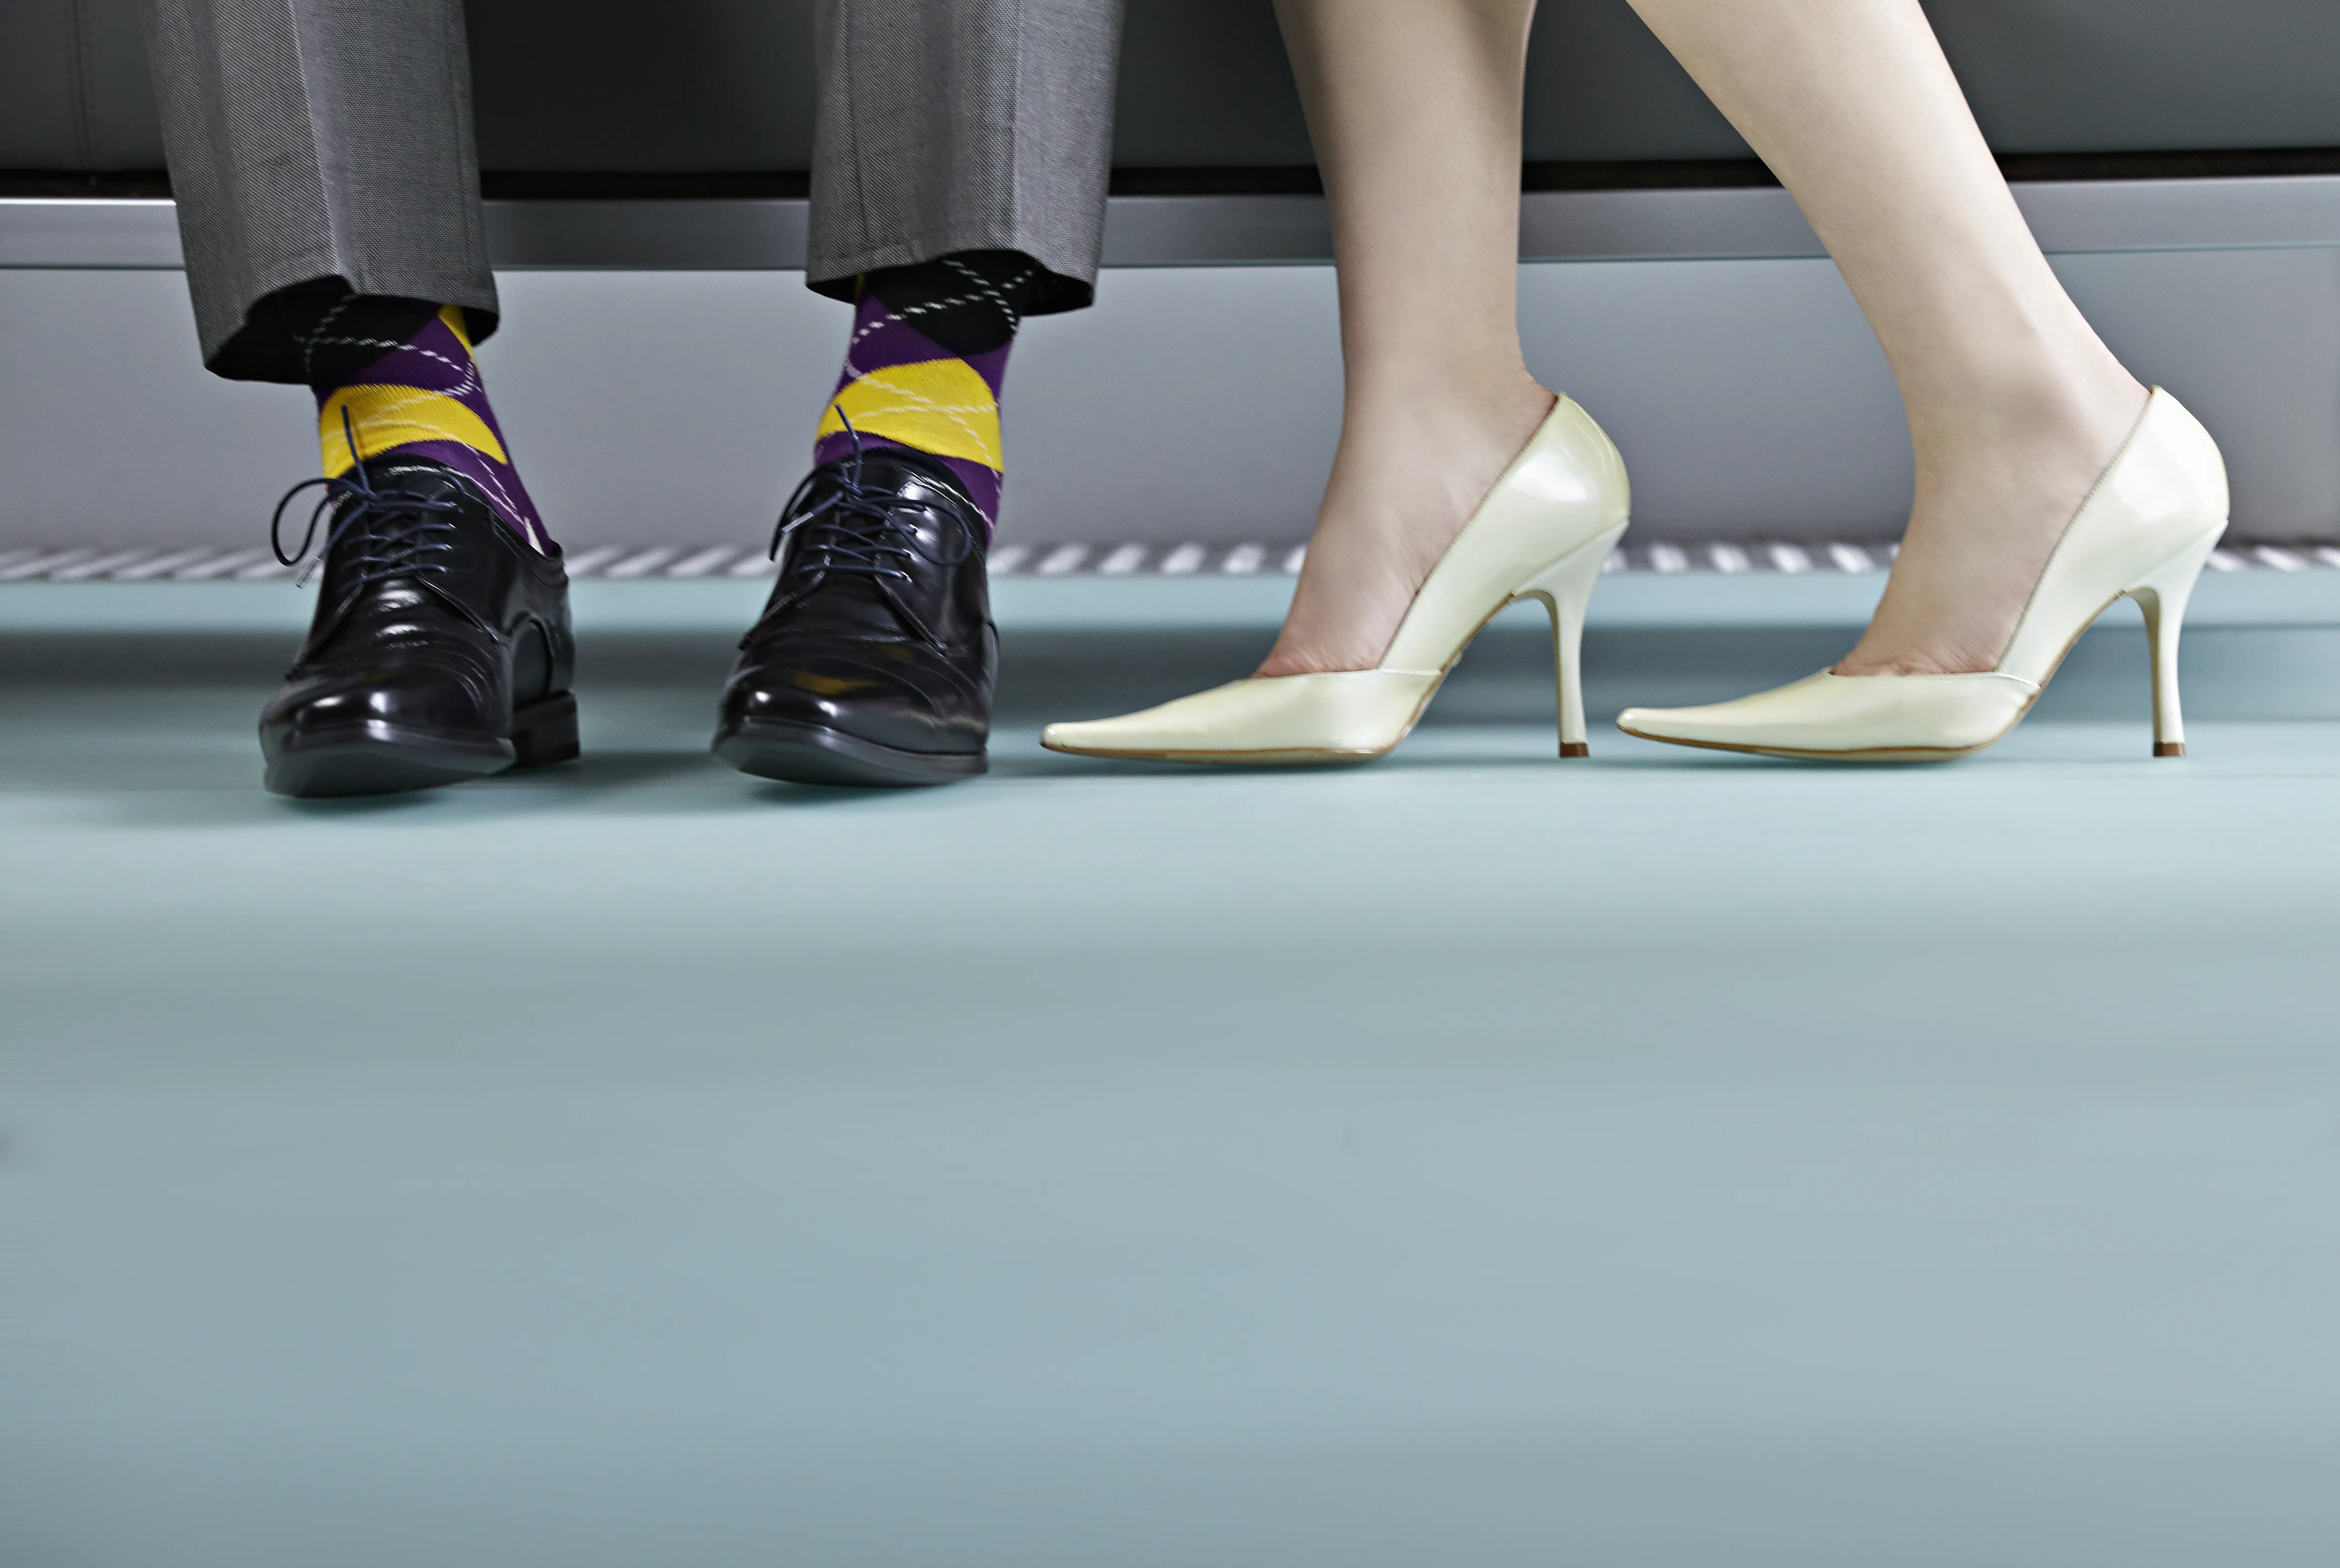 How to Keep an Office Romance from Destroying Your Career